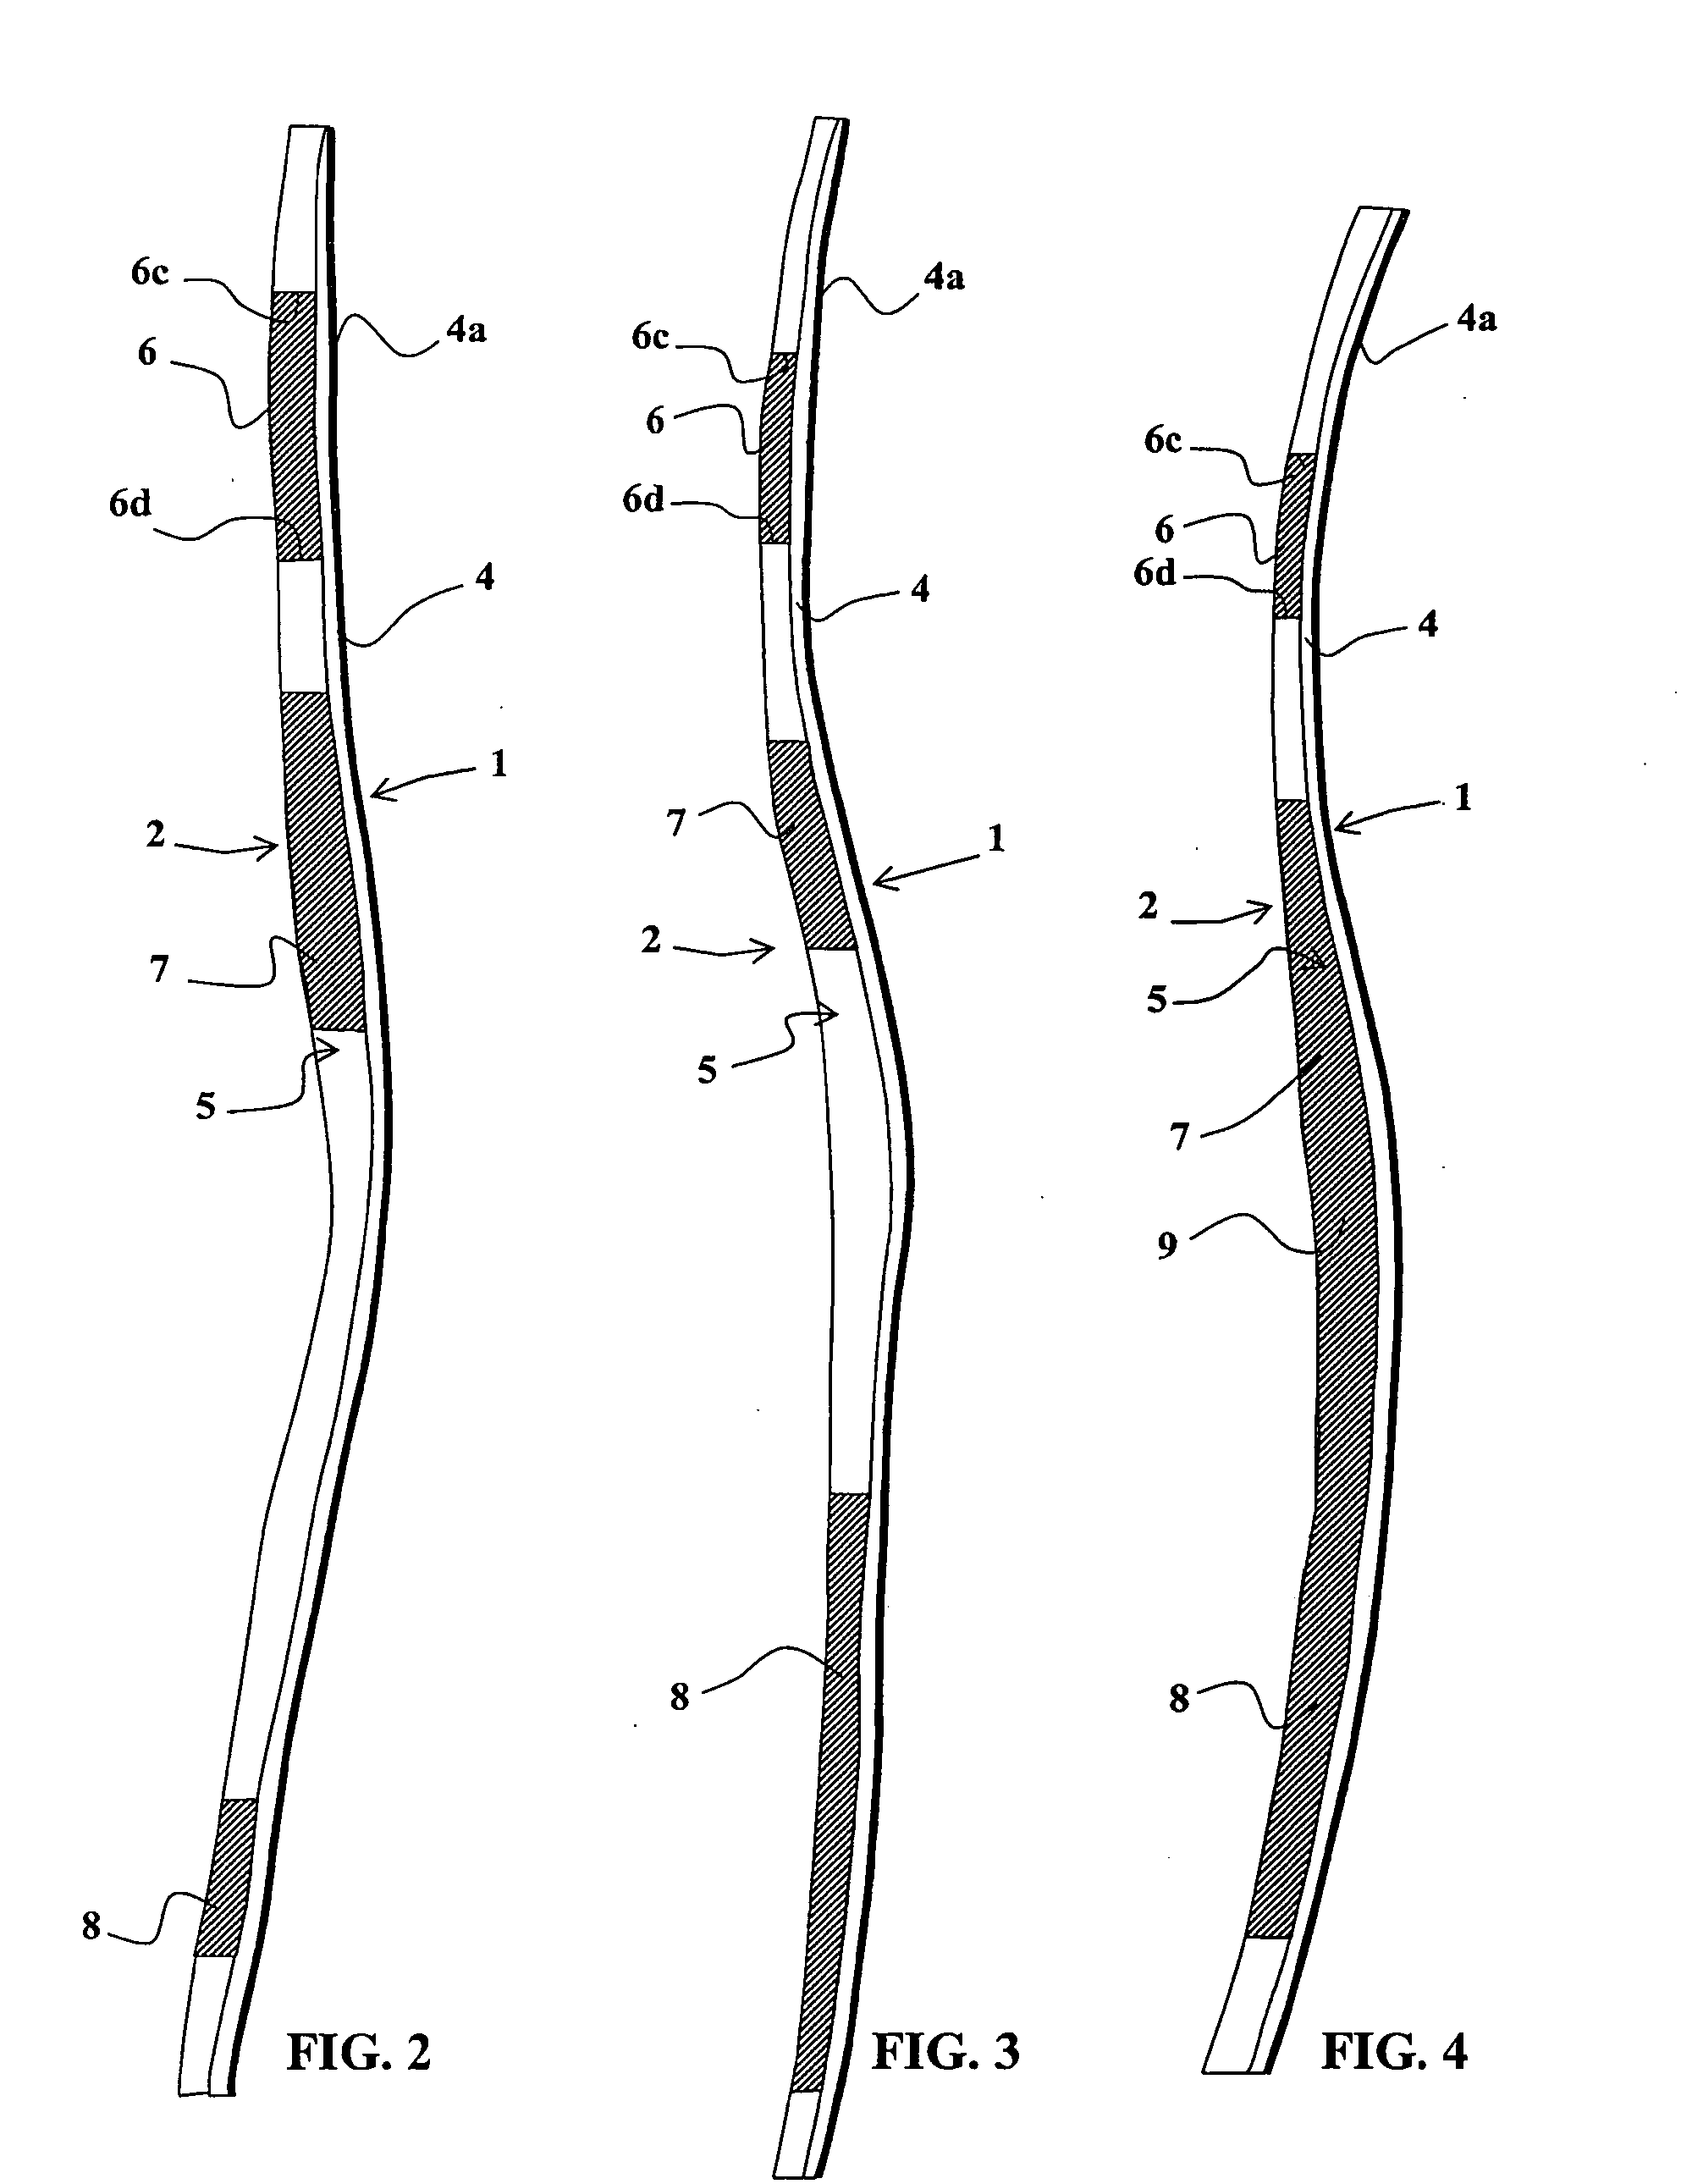 Selectively damping plantar insole